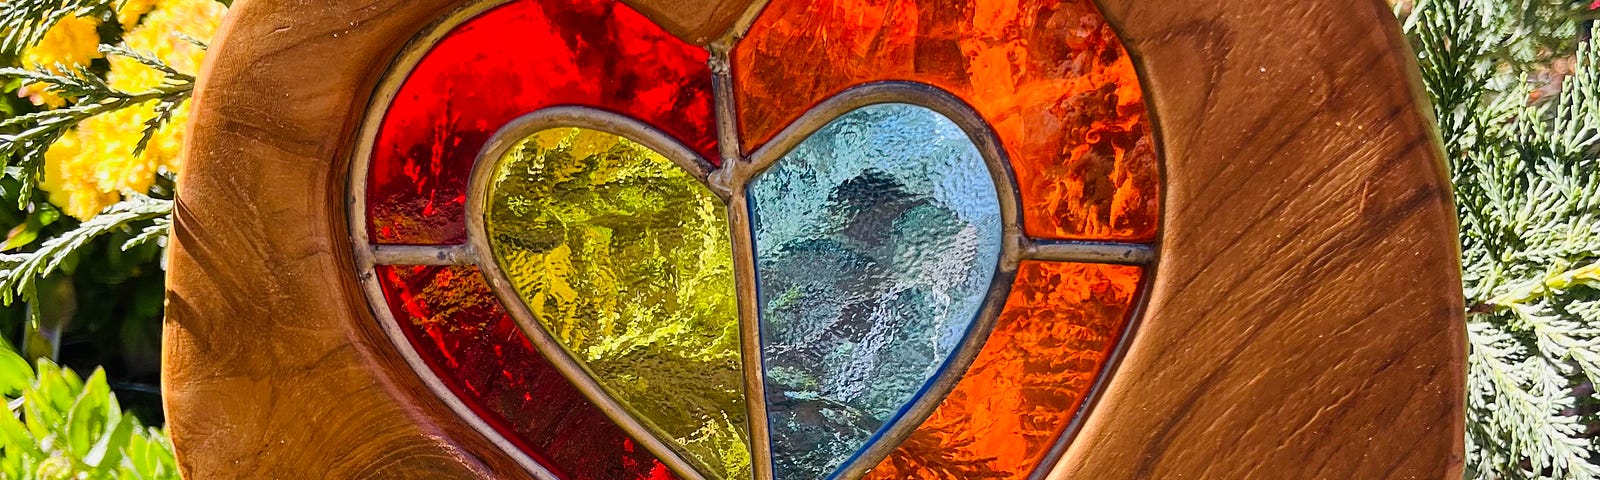 A stained glass heart shines through a circular wooden art piece